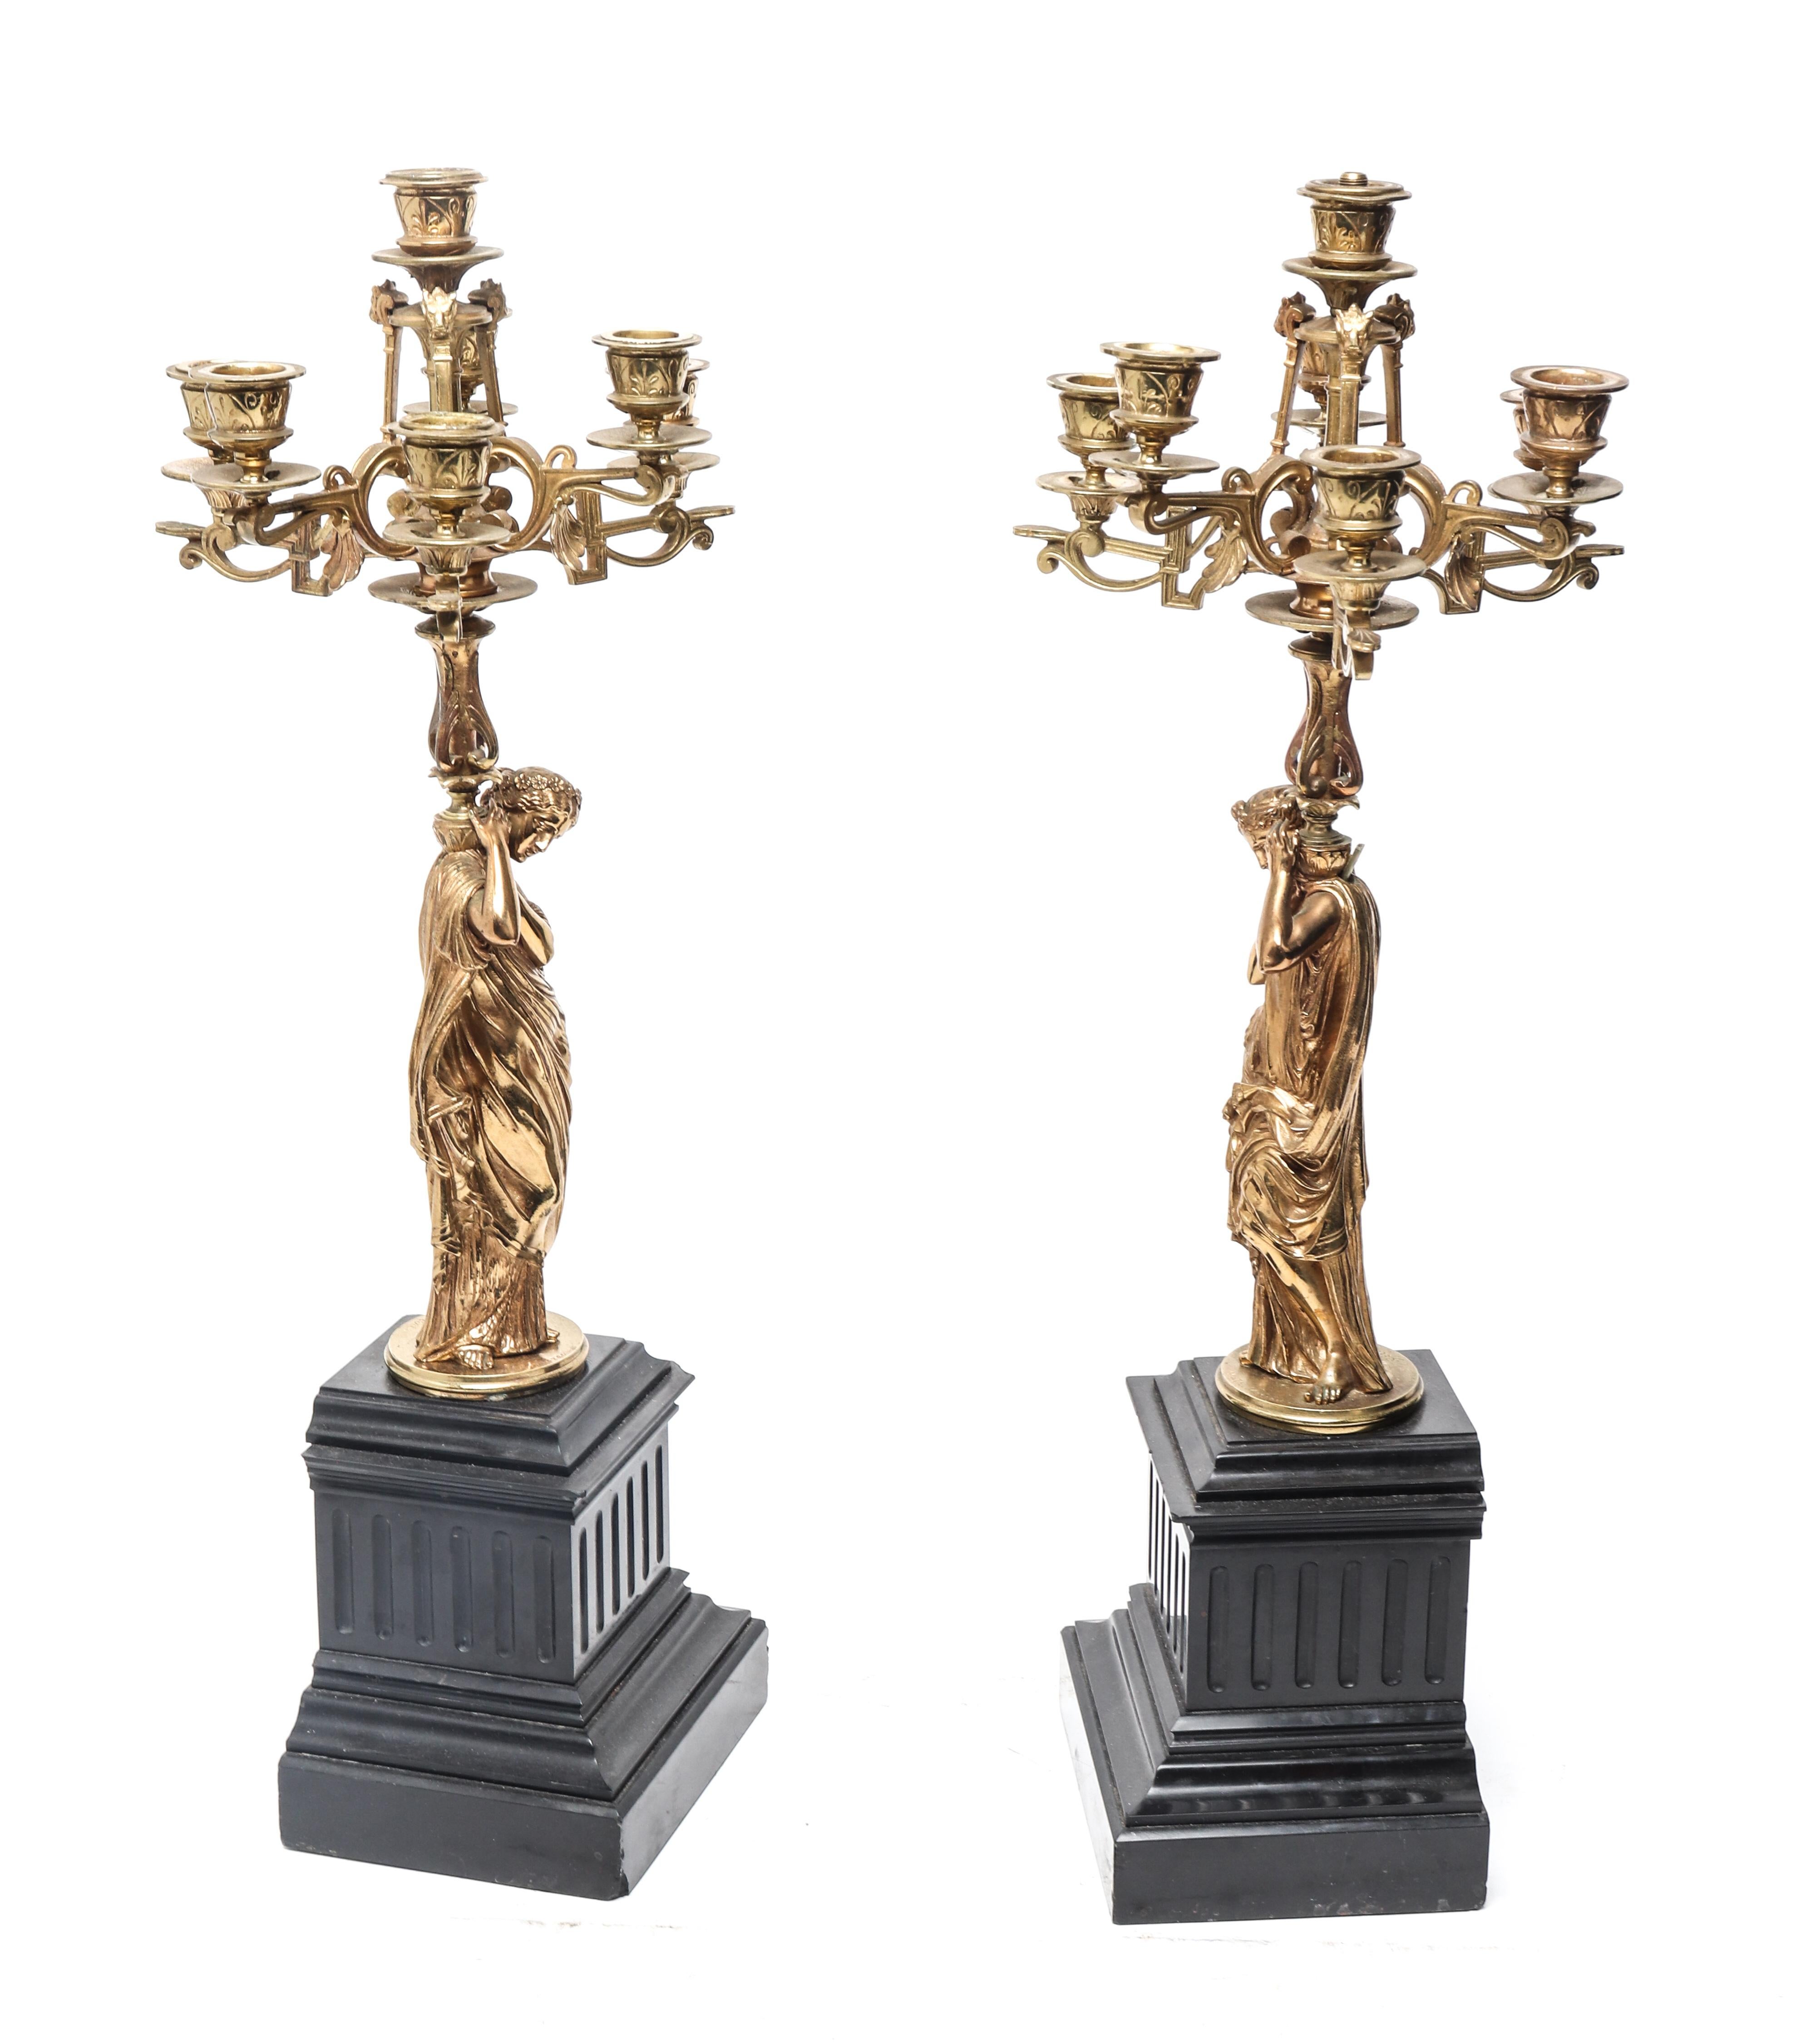 French neoclassical style pair of ormolu and stone figural seven-light candelabras, the ormolu figures after Mathurin Moreau. Made in the early 20th century and inscribed 